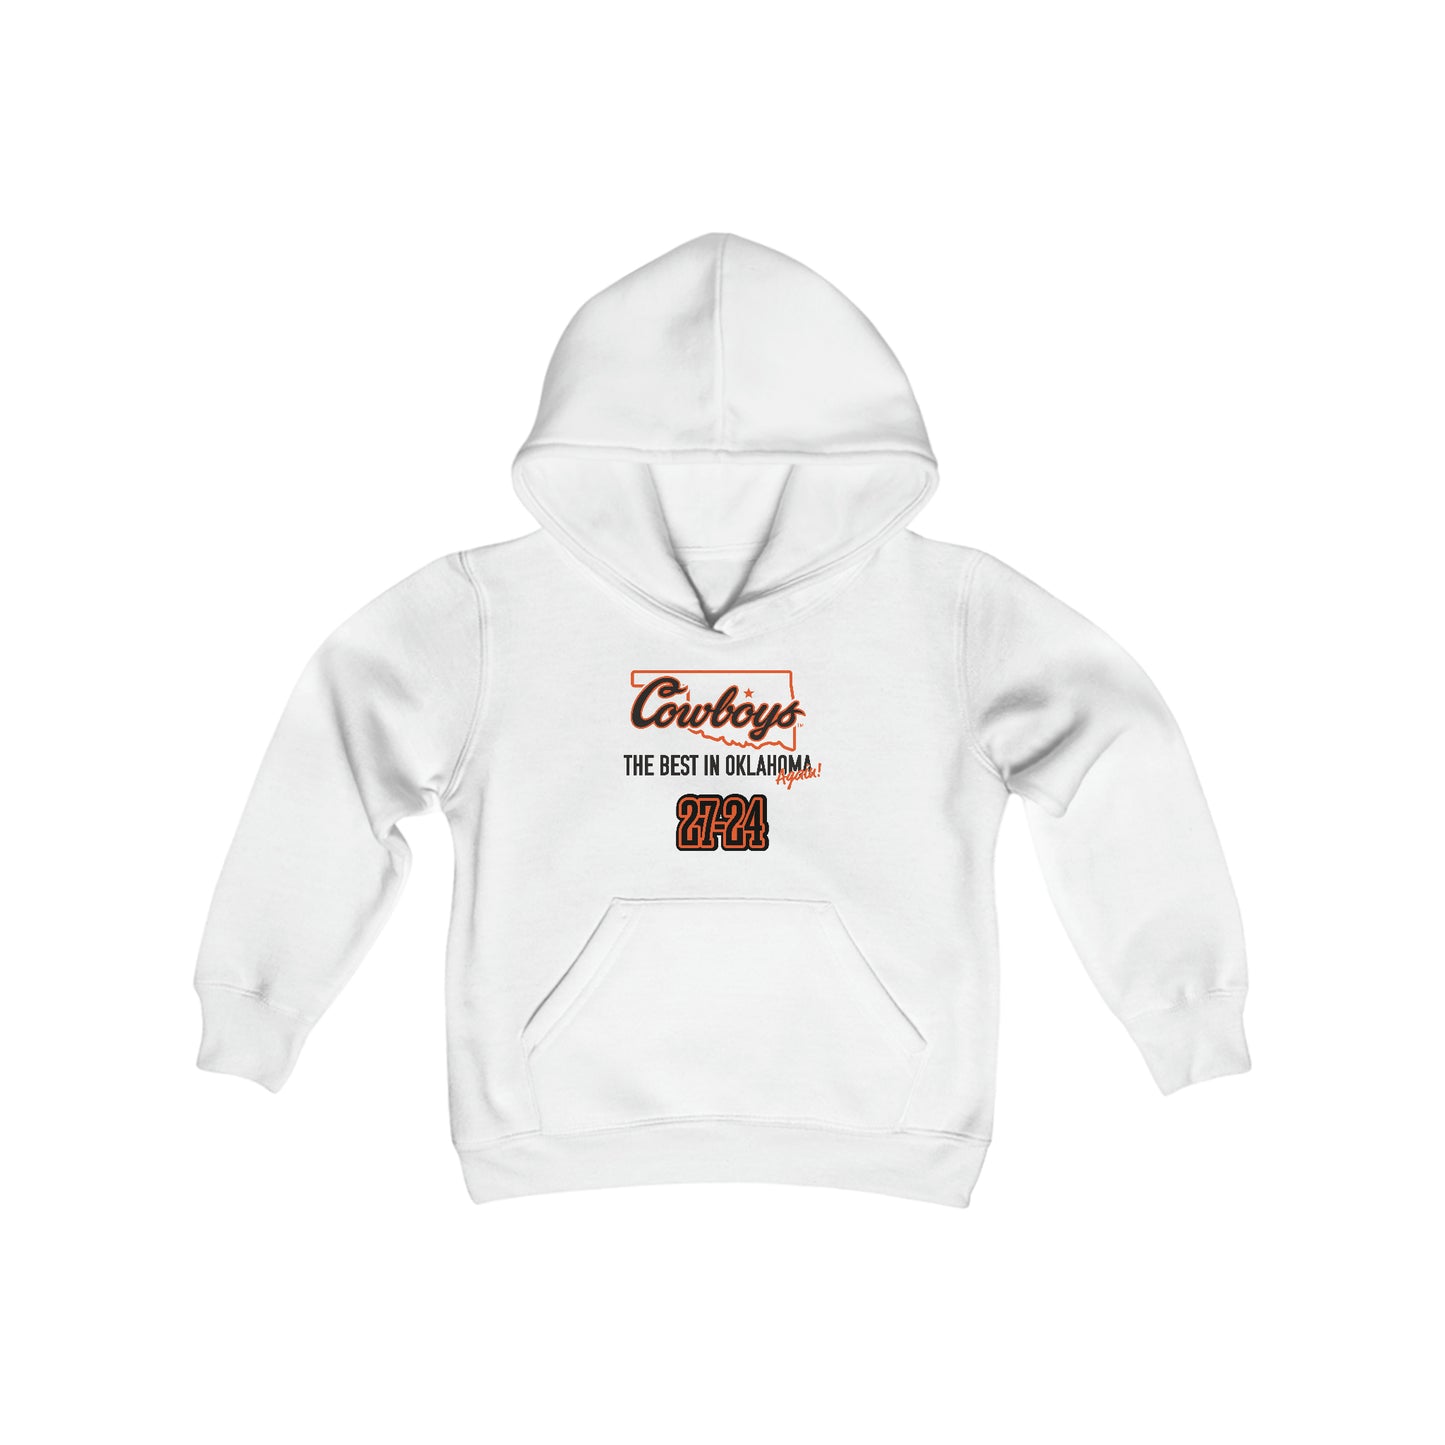 Youth Forever Own The State Bedlam Hoodie